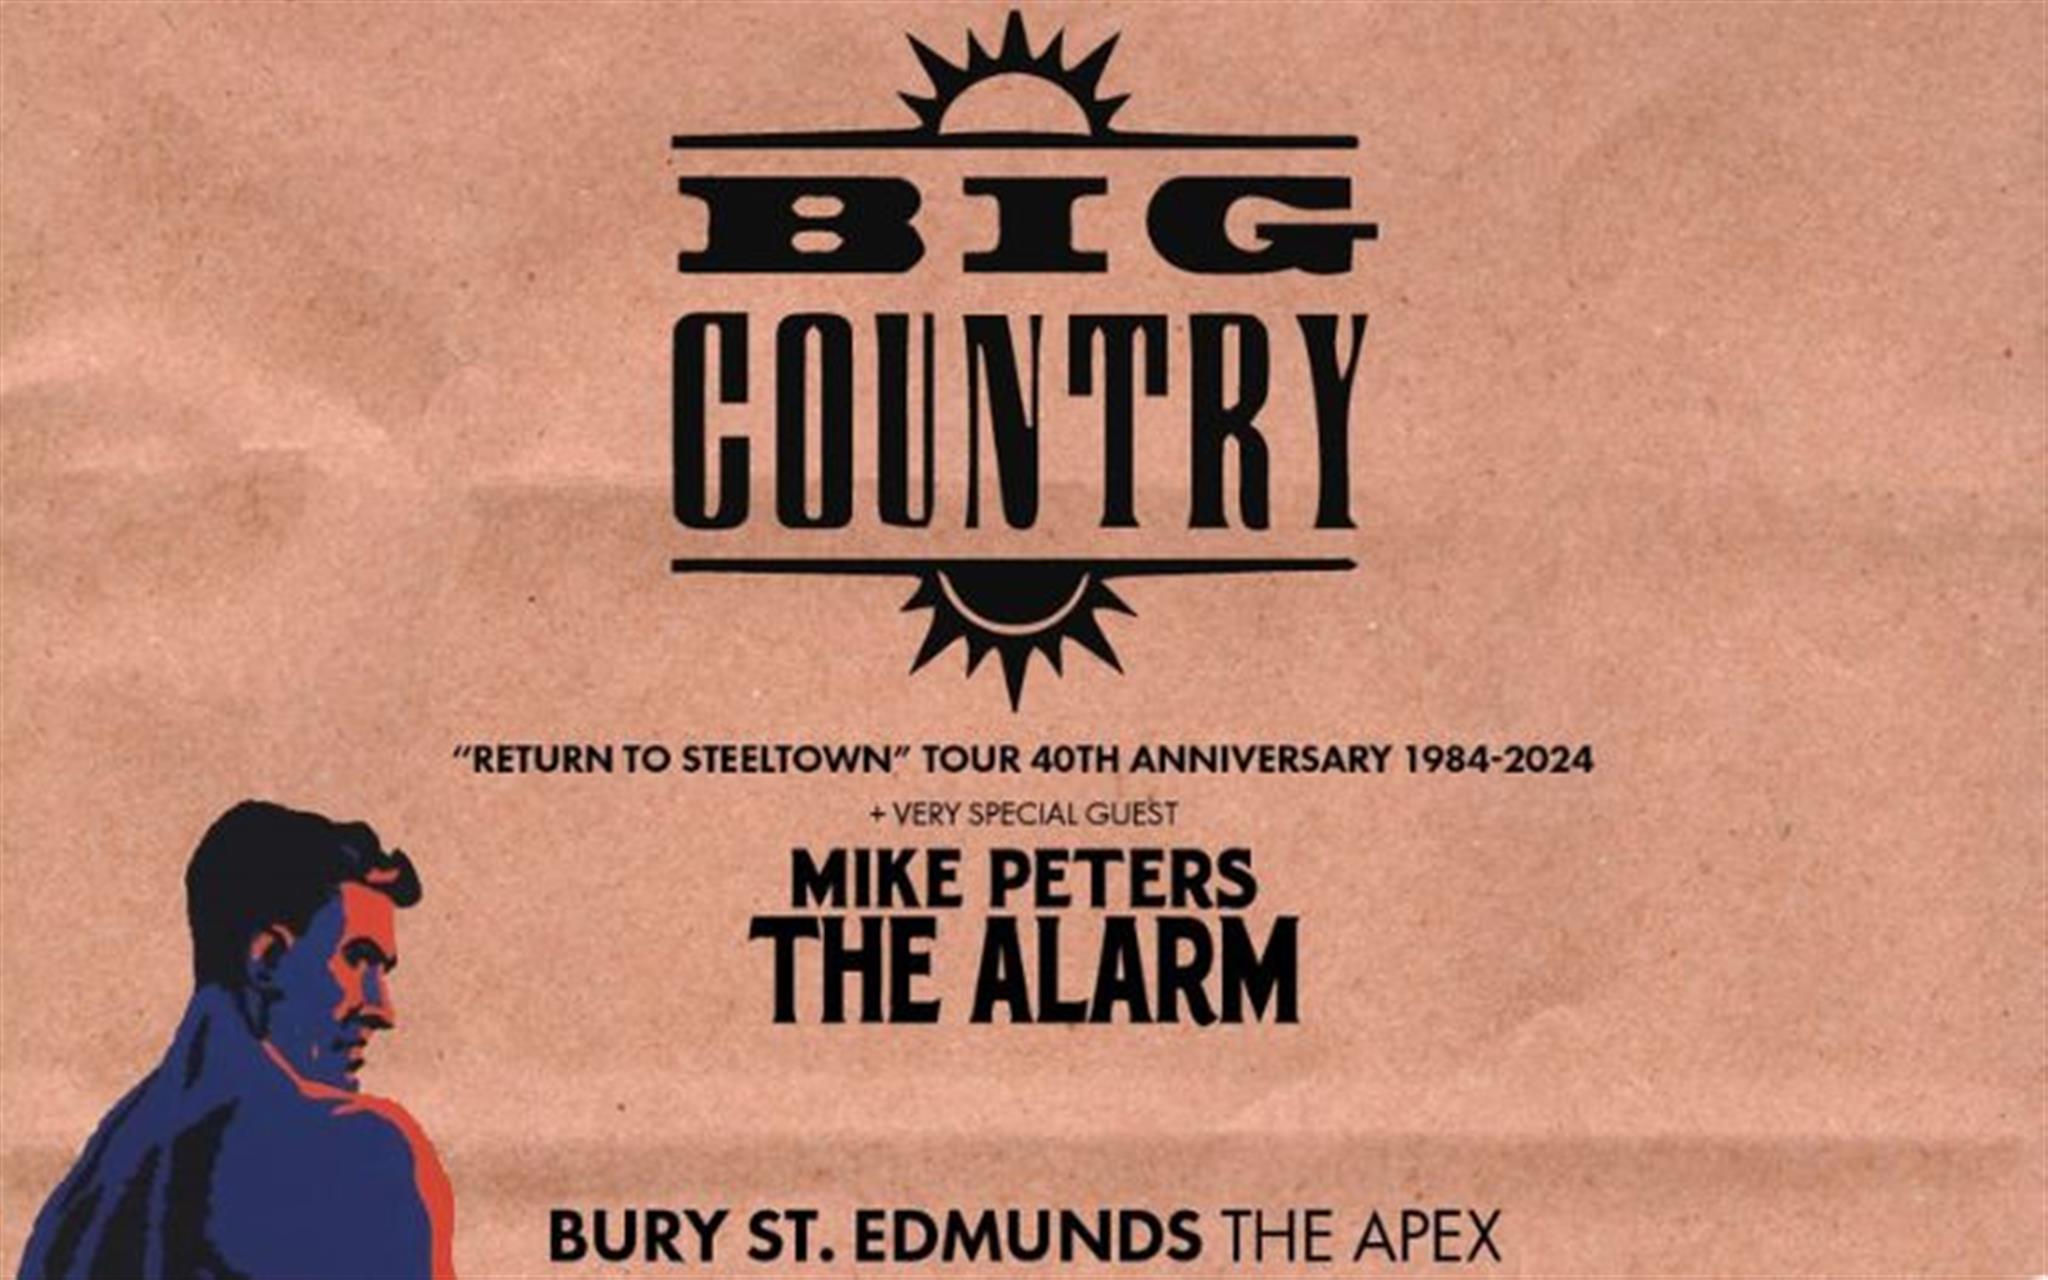 Big Country & Mike Peters of The Alarm